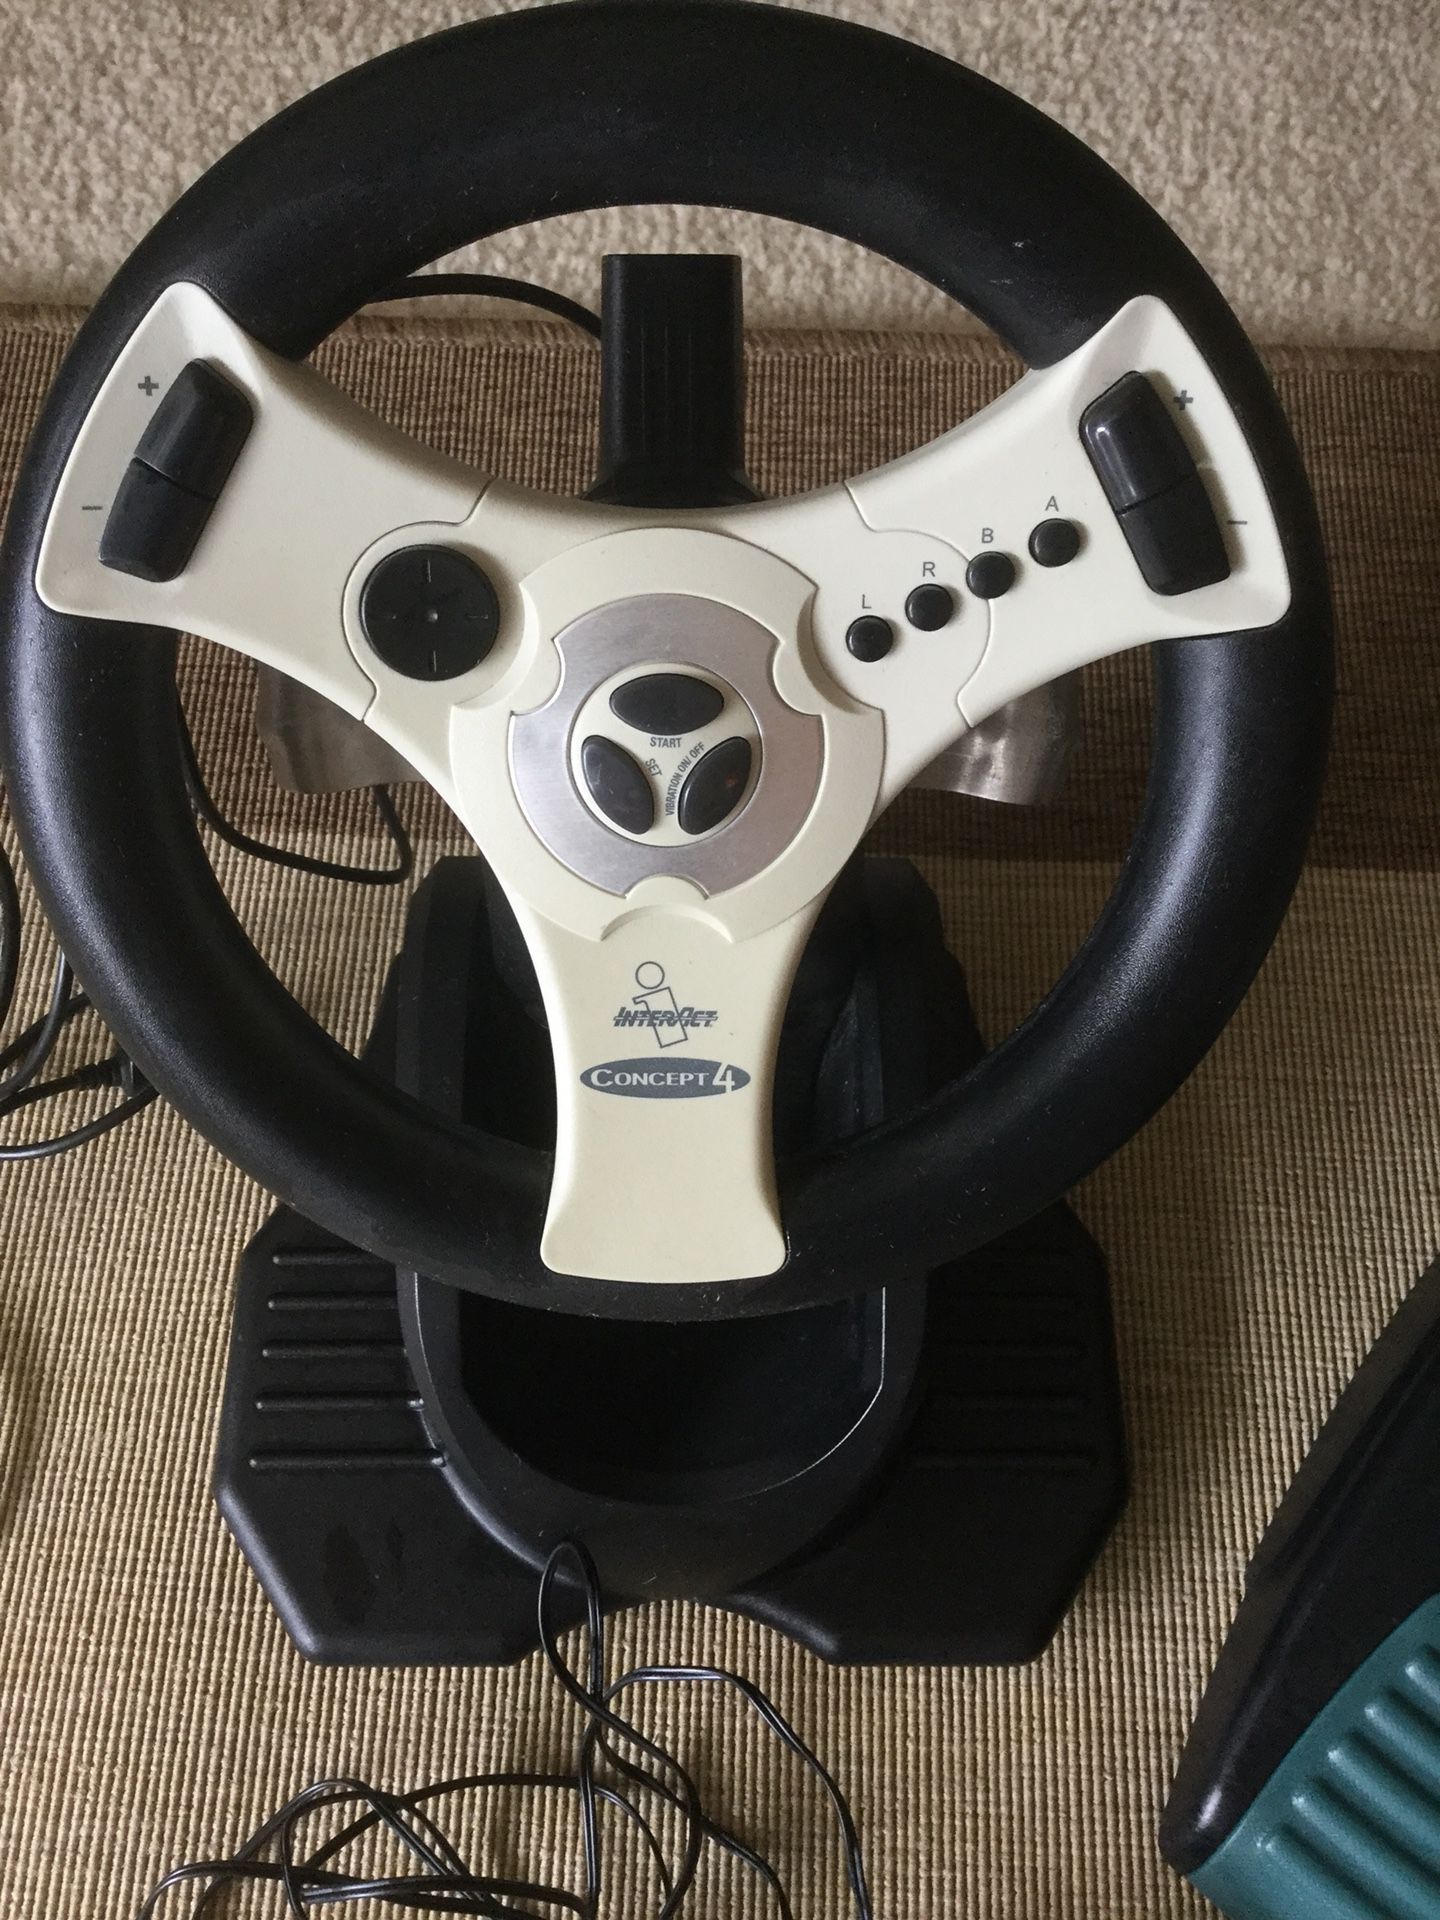 Dreamcast steering wheel for Racing games 🏎🏎🏎😁👍 Force-resistance for realistic fun gaming / Love Dreamcast